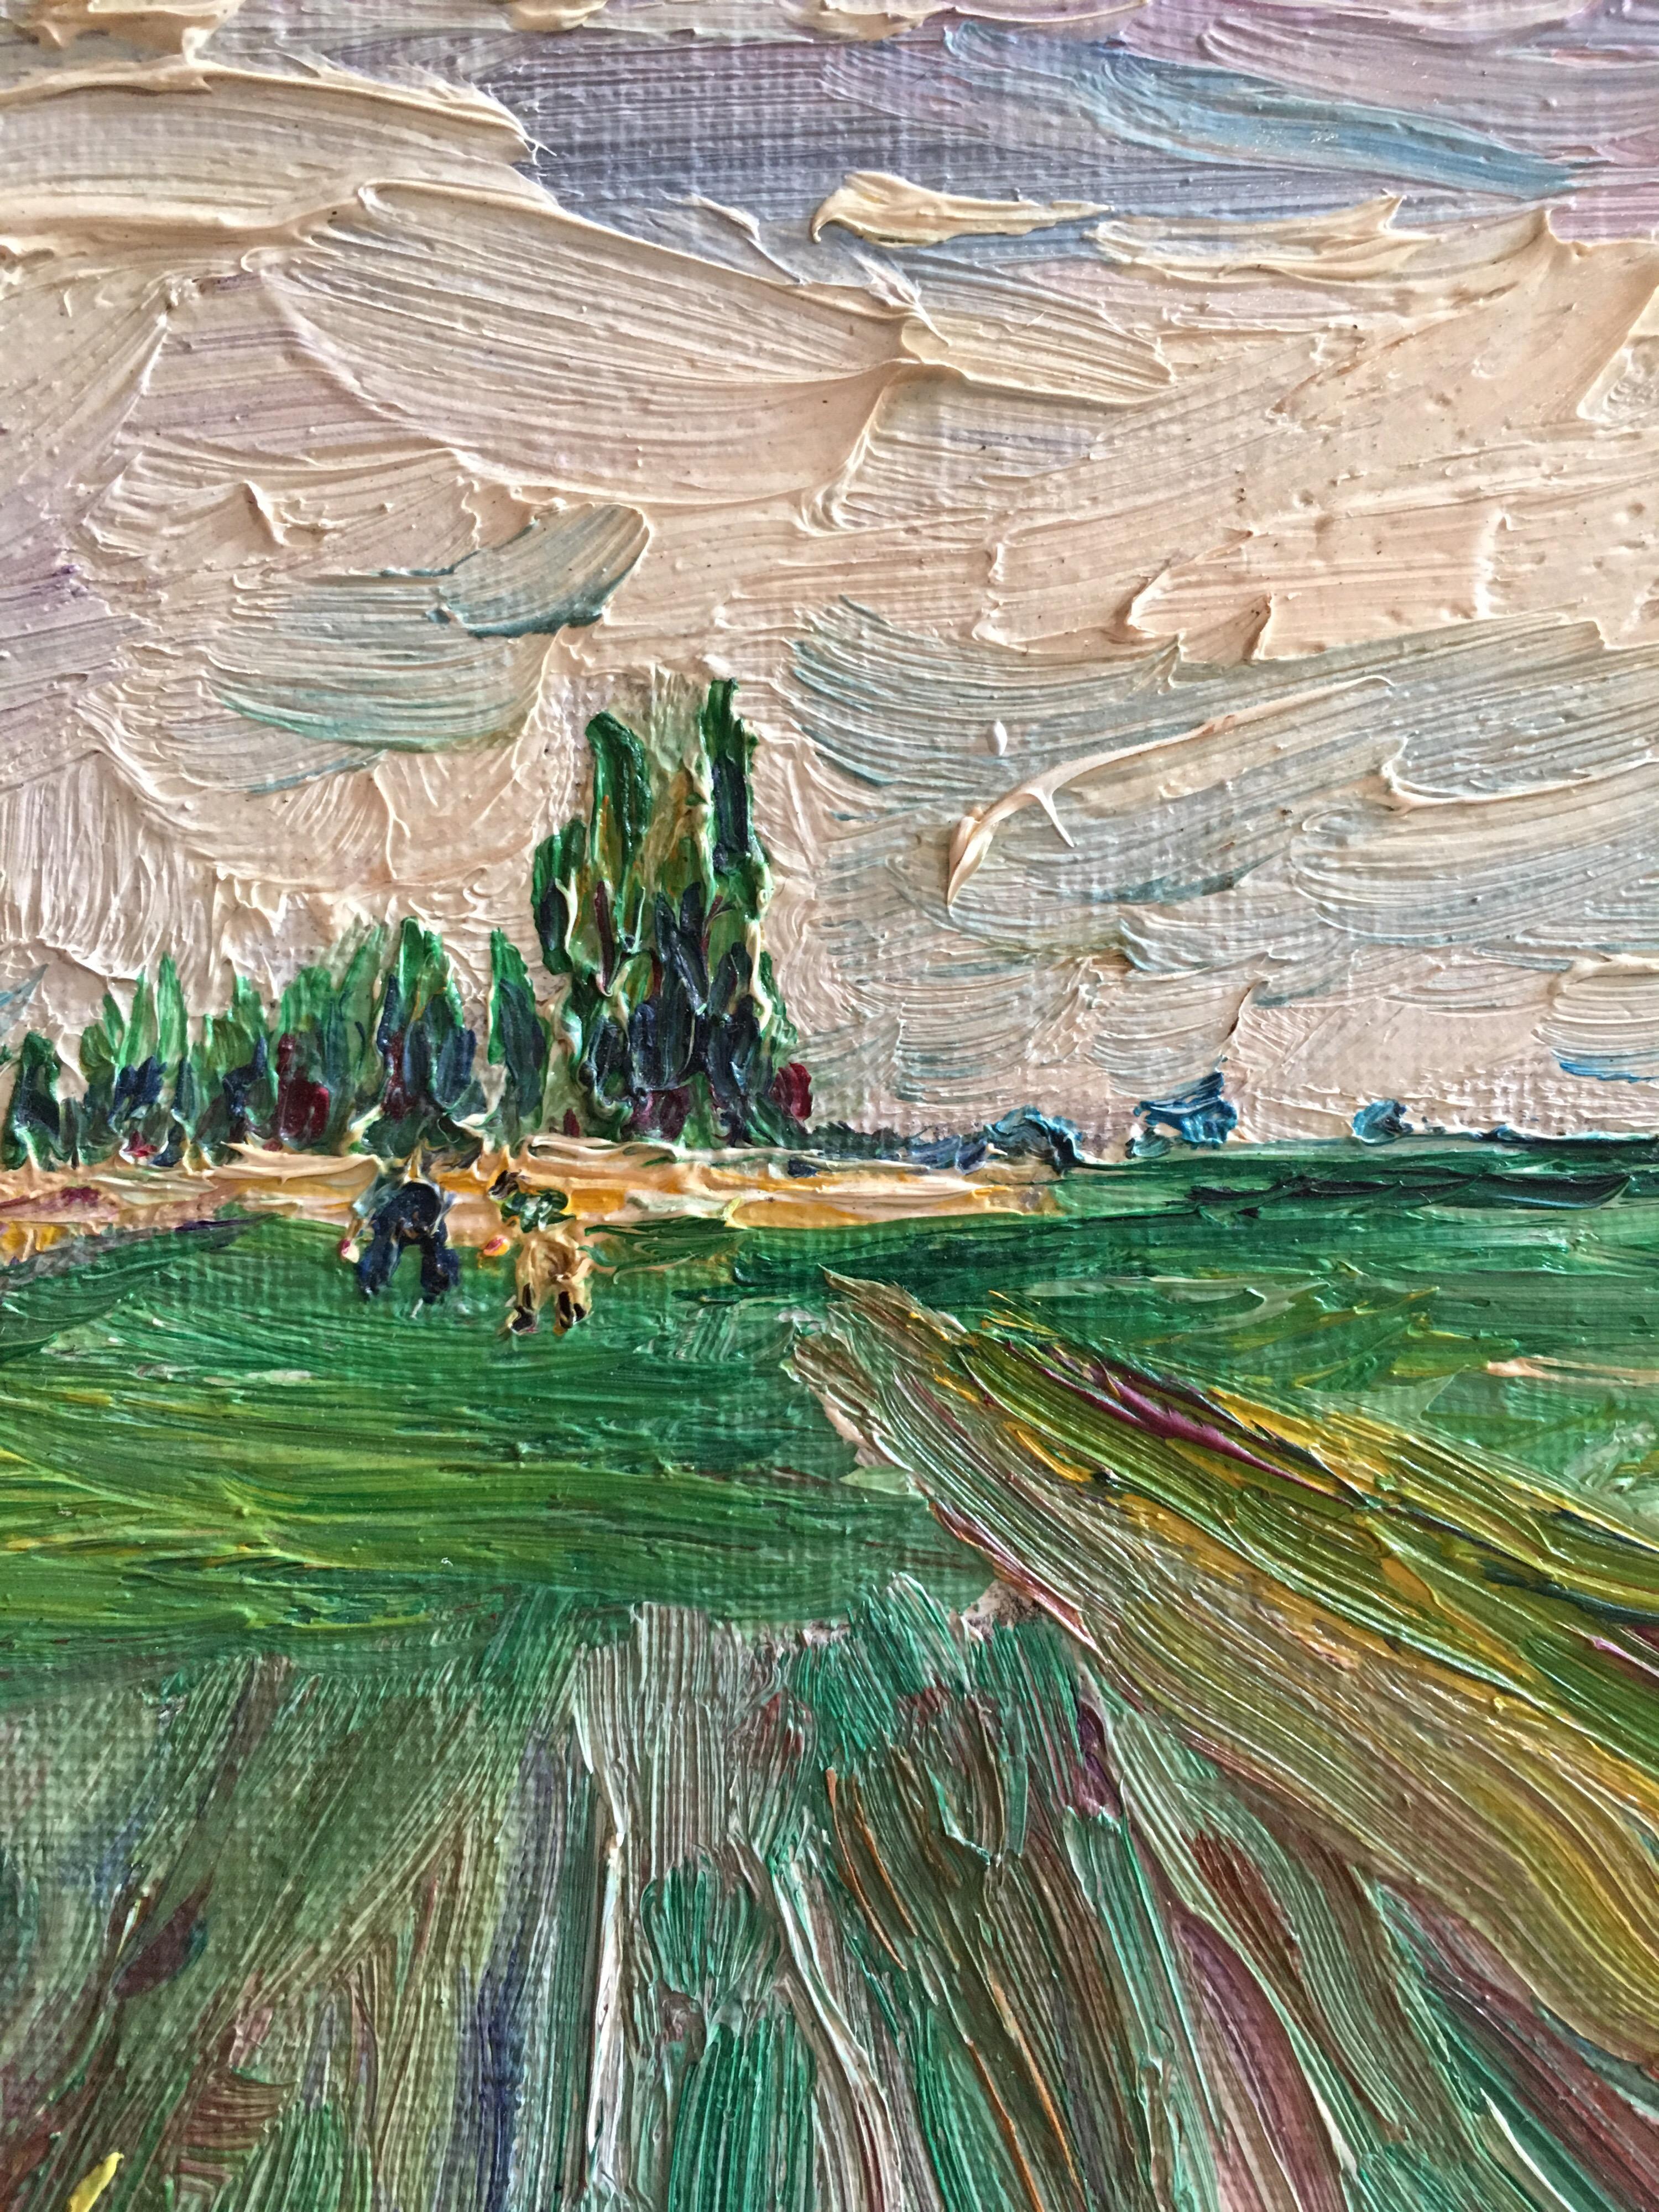 Pink Fields, Impressionist Landscape, Pastel Colours, Oil Painting
French School, Mid 20th Century
Oil painting on canvas, unframed
Canvas size: 10.5 x 16 inches

Sunset pink fields, showing a soft dappled light, with muted pastels. 

This oil